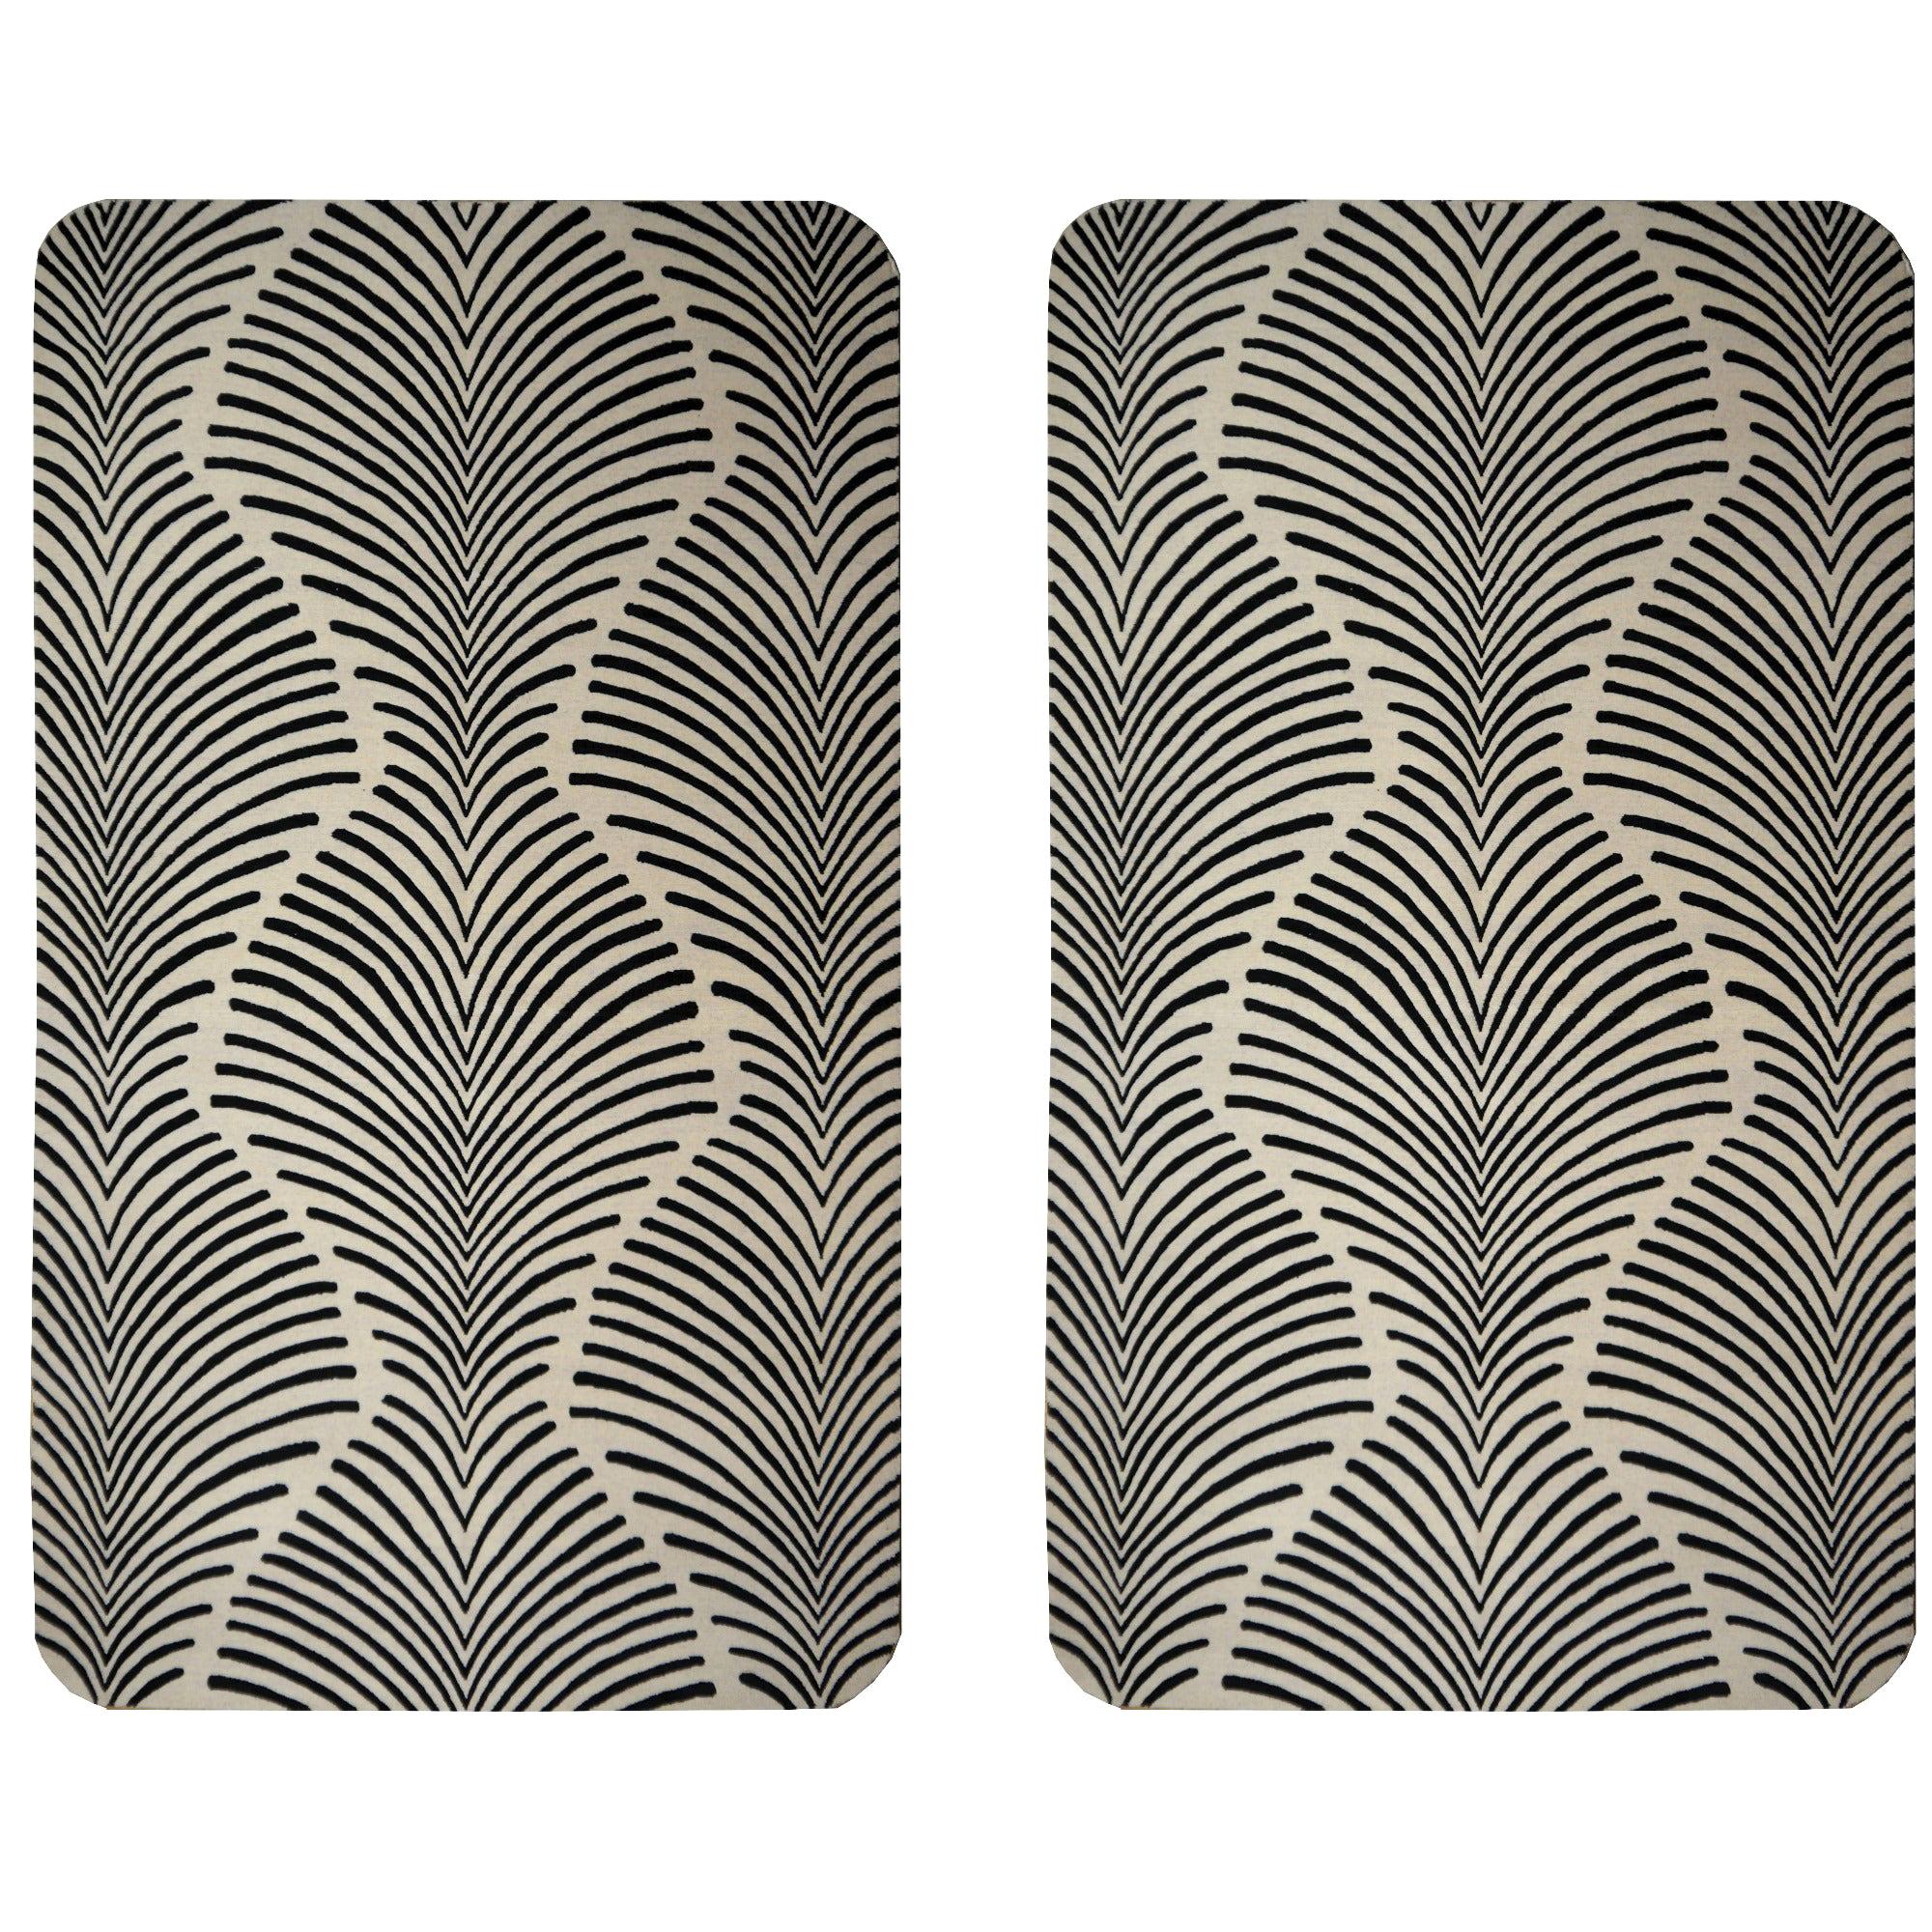 Pair of Hand Knotted Zebra Rugs in Style of Art Deco